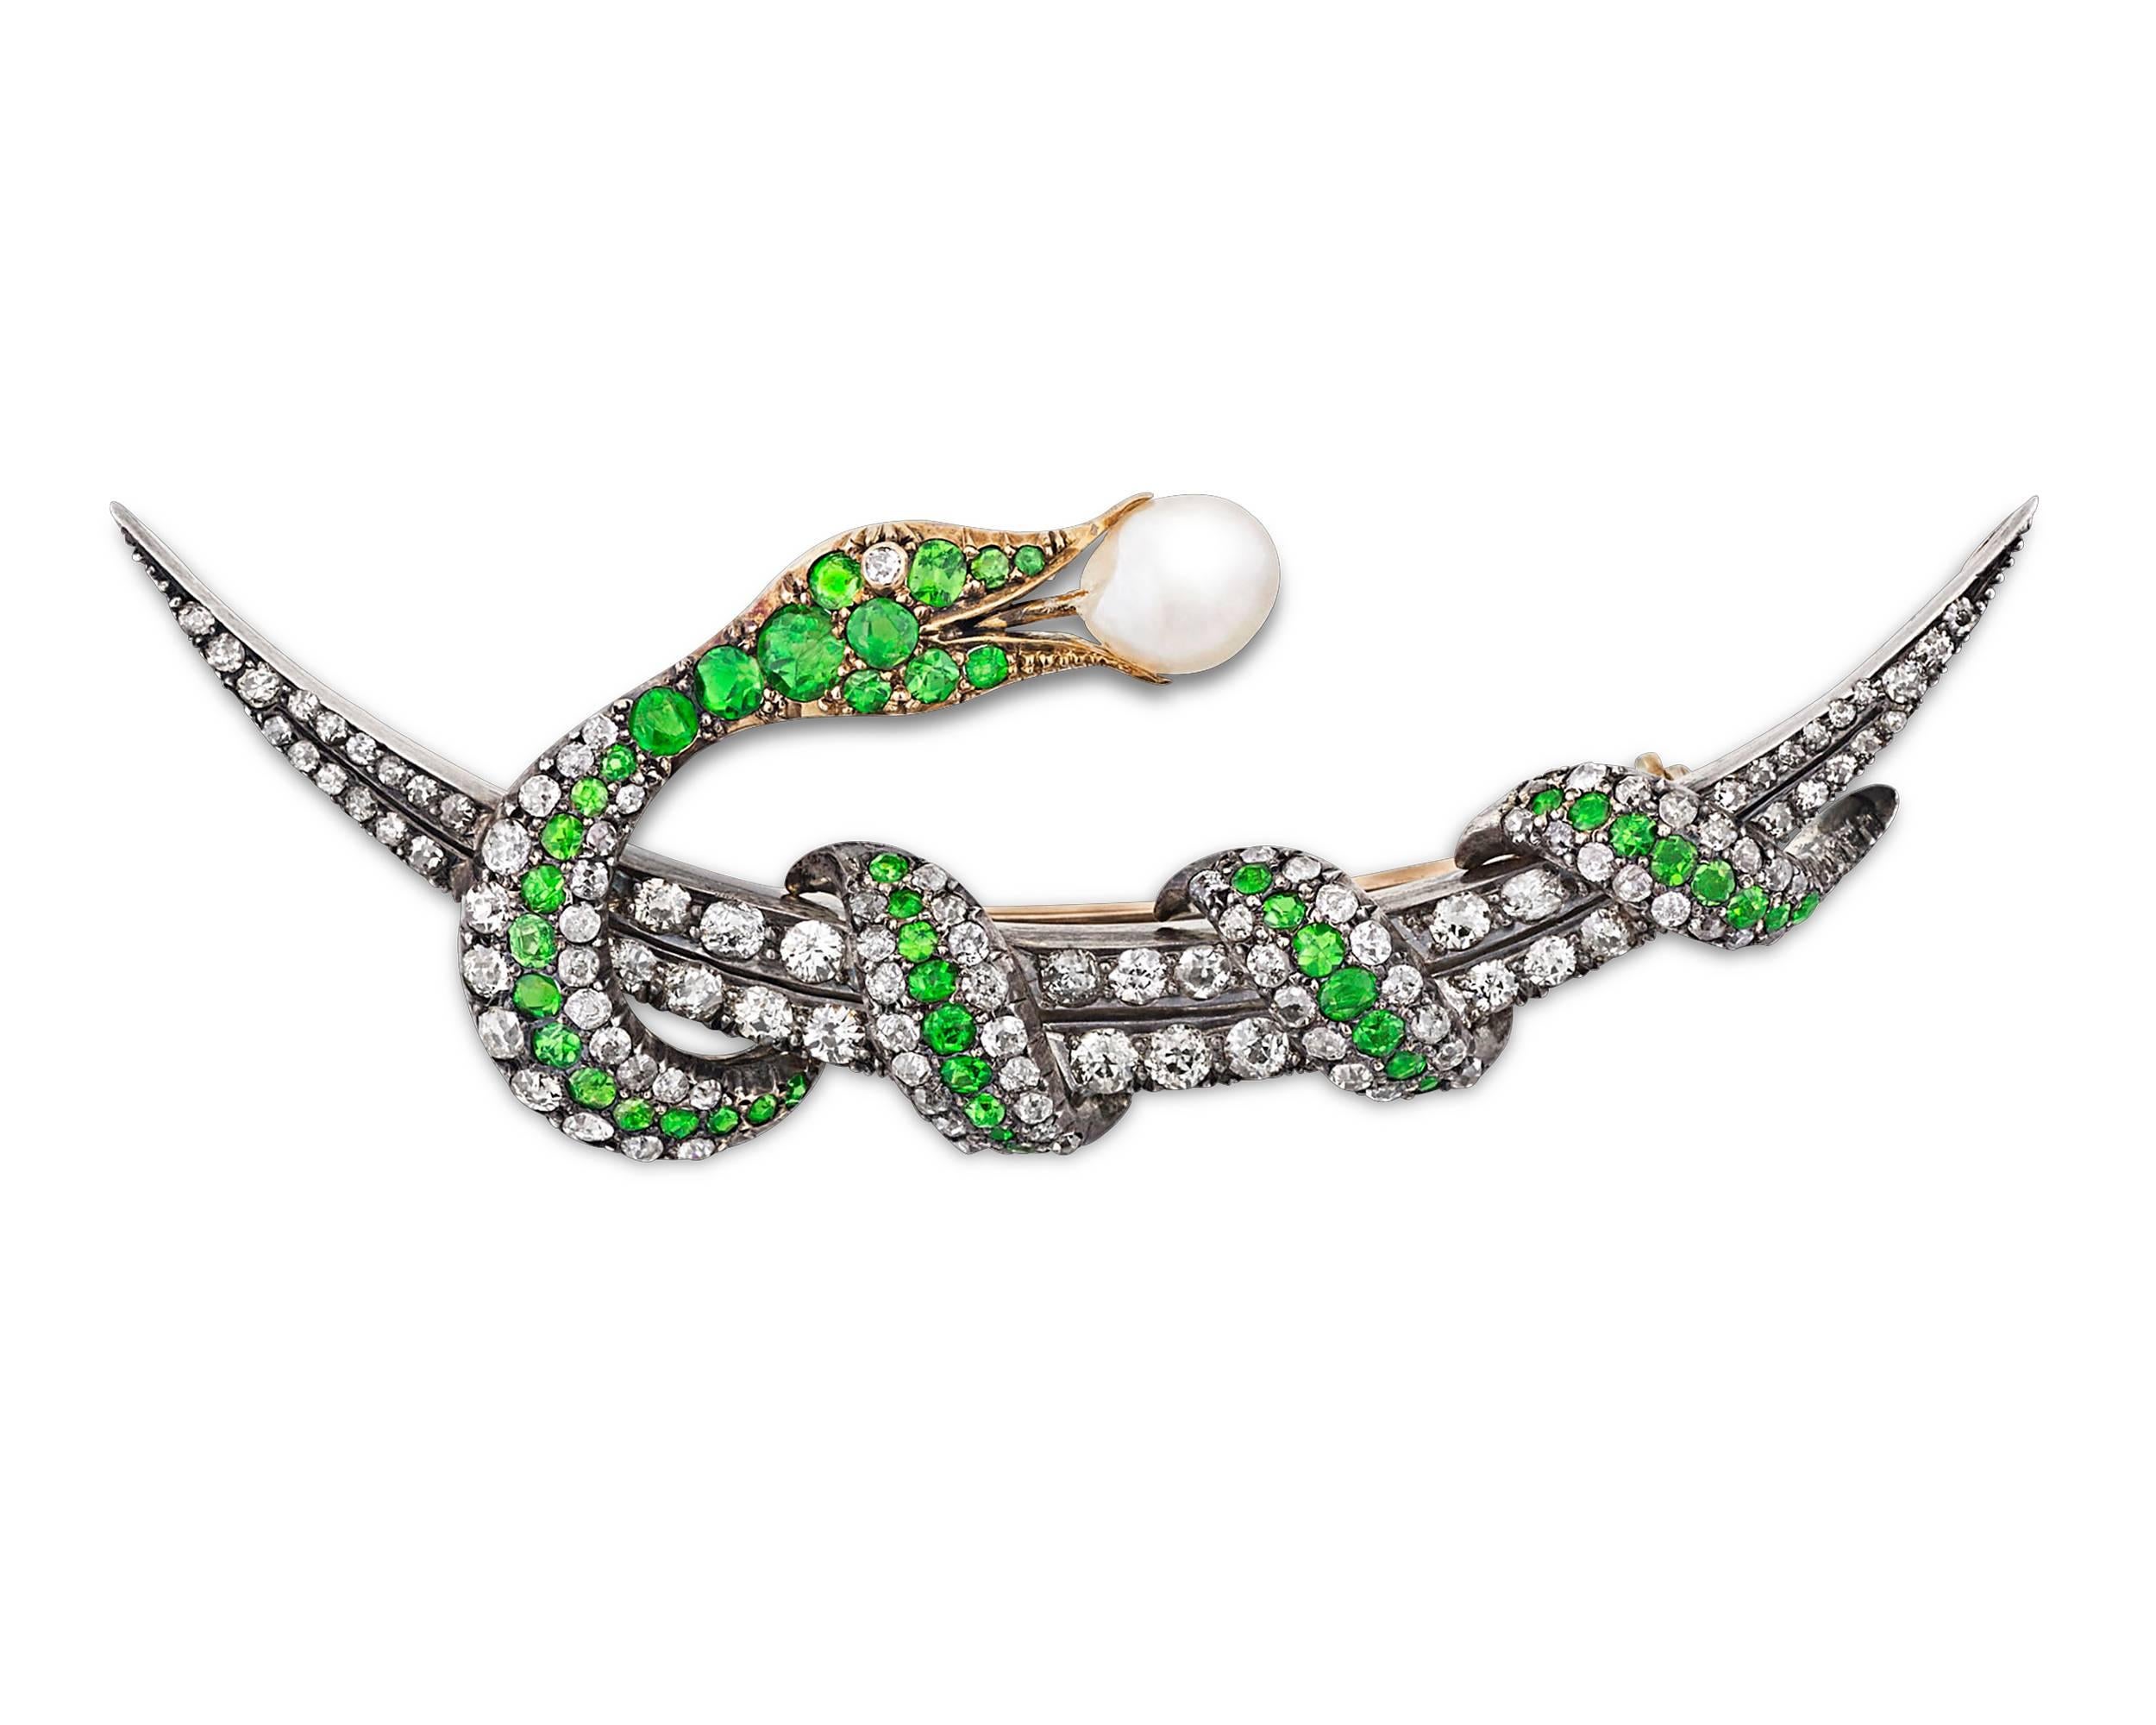 The brilliant green of demantoid garnets accentuate the sleek serpent winding around a crescent moon in this dazzling Victorian brooch. Forty-eight Old Mine and cushion-cut demantoids weighing a total of 2.75 carats highlight snake's body, while 117